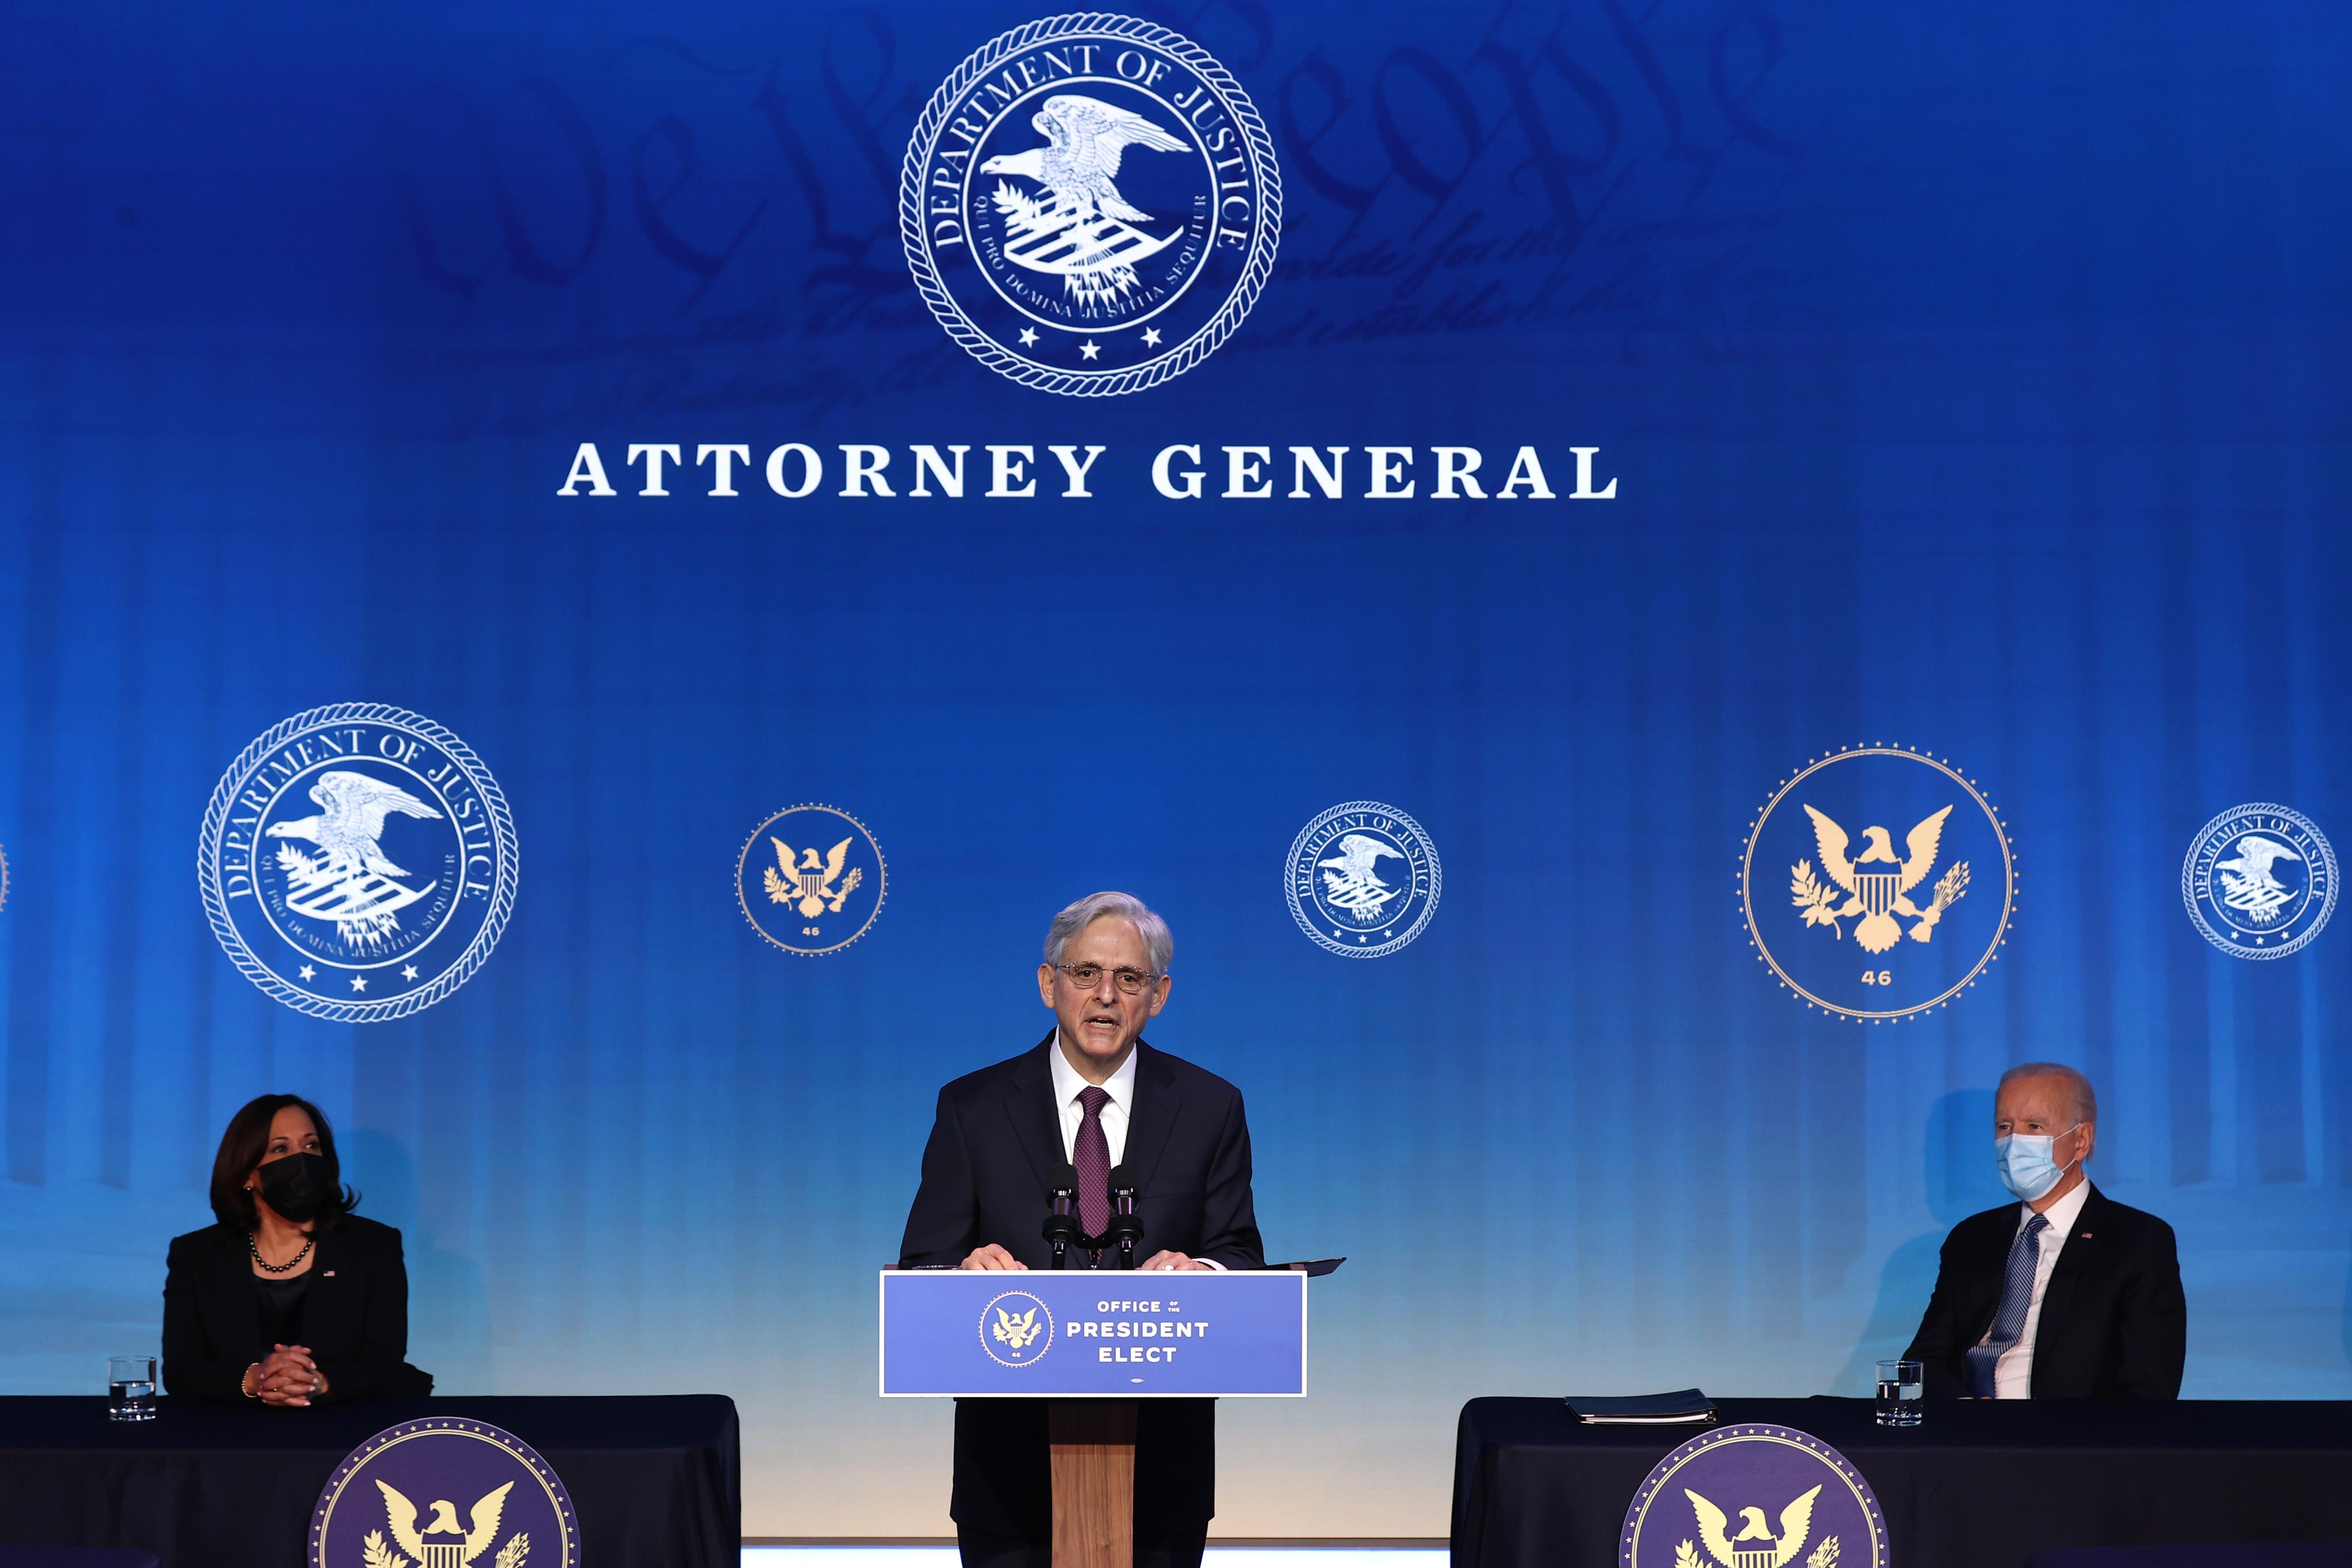 Merrick Garland speaks at a podium labeled Office of the President Elect as Joe Biden and Kamala Harris look on, seated on either side of him on a stage with a backdrop that says Attorney General.